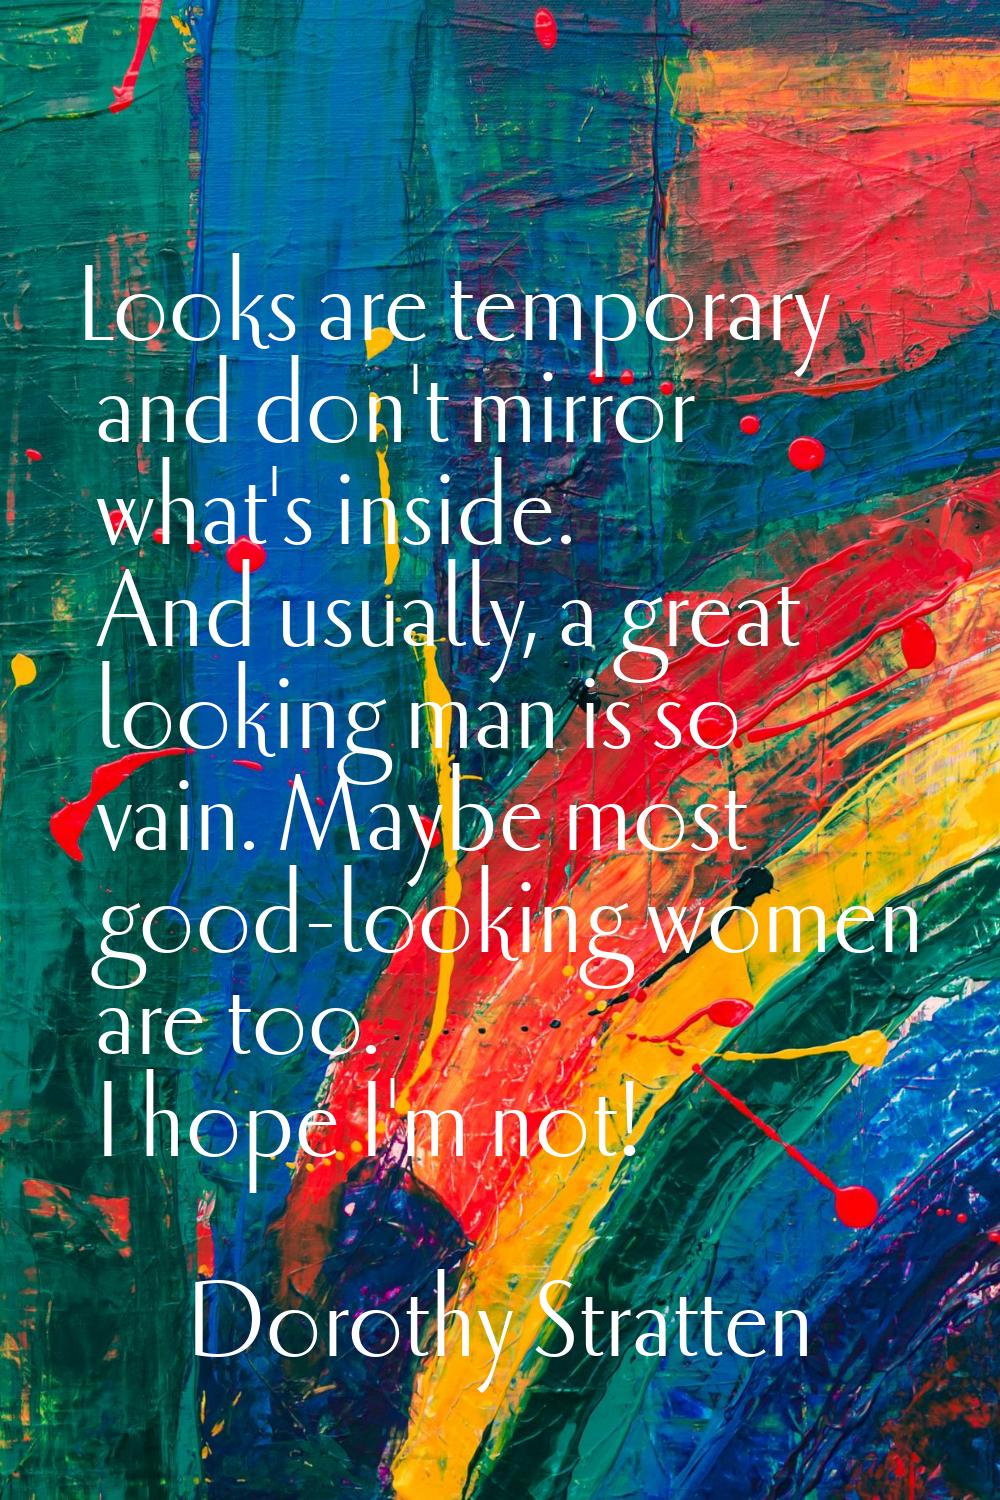 Looks are temporary and don't mirror what's inside. And usually, a great looking man is so vain. Ma